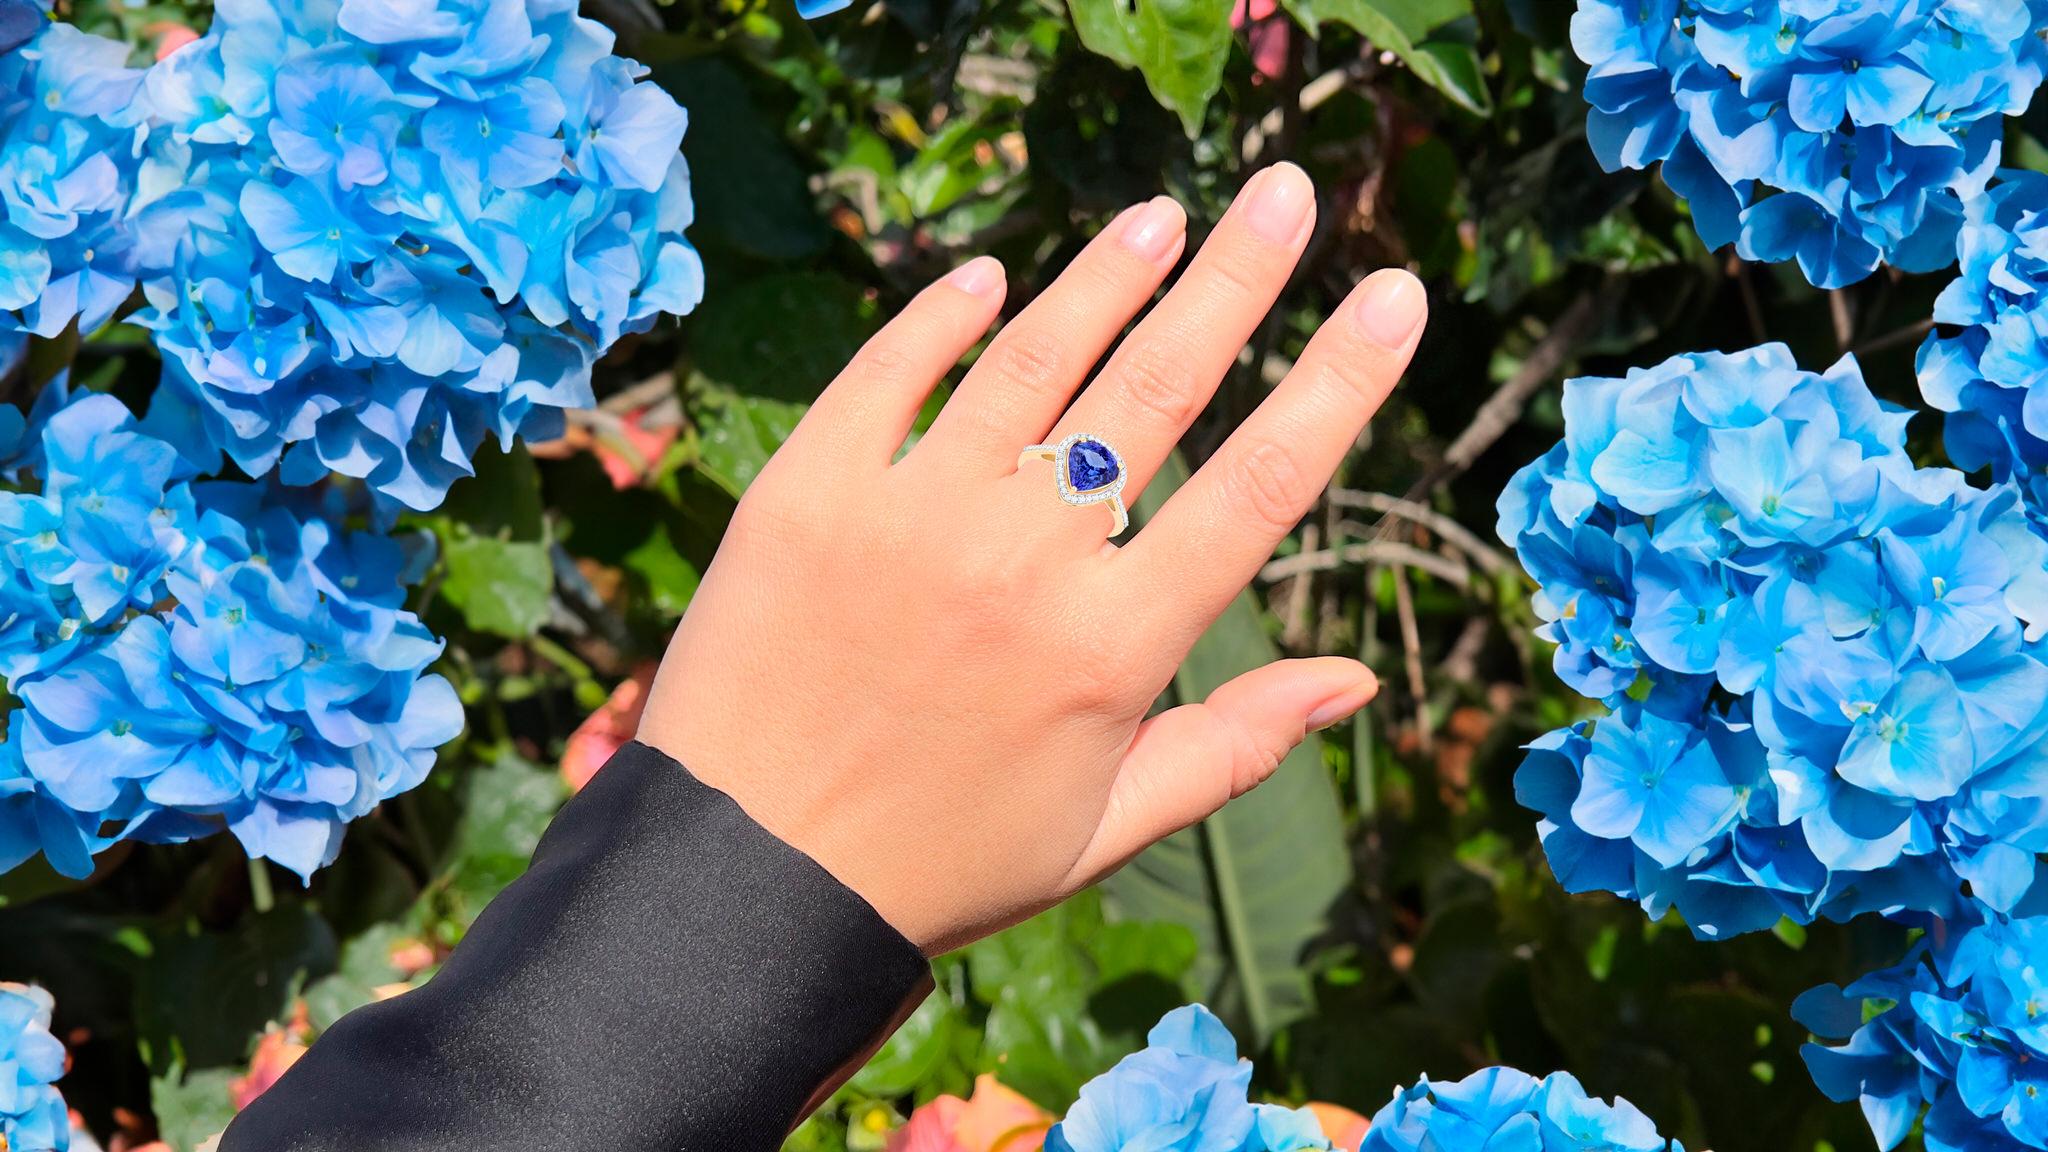 It comes with the Gemological Appraisal by GIA GG/AJP
All Gemstones are Natural
Tanzanite = 2.10 Carat
45 Diamonds = 0.20 Carats
Metal: 14K Yellow Gold
Ring Size: 7* US
*It can be resized complimentary
